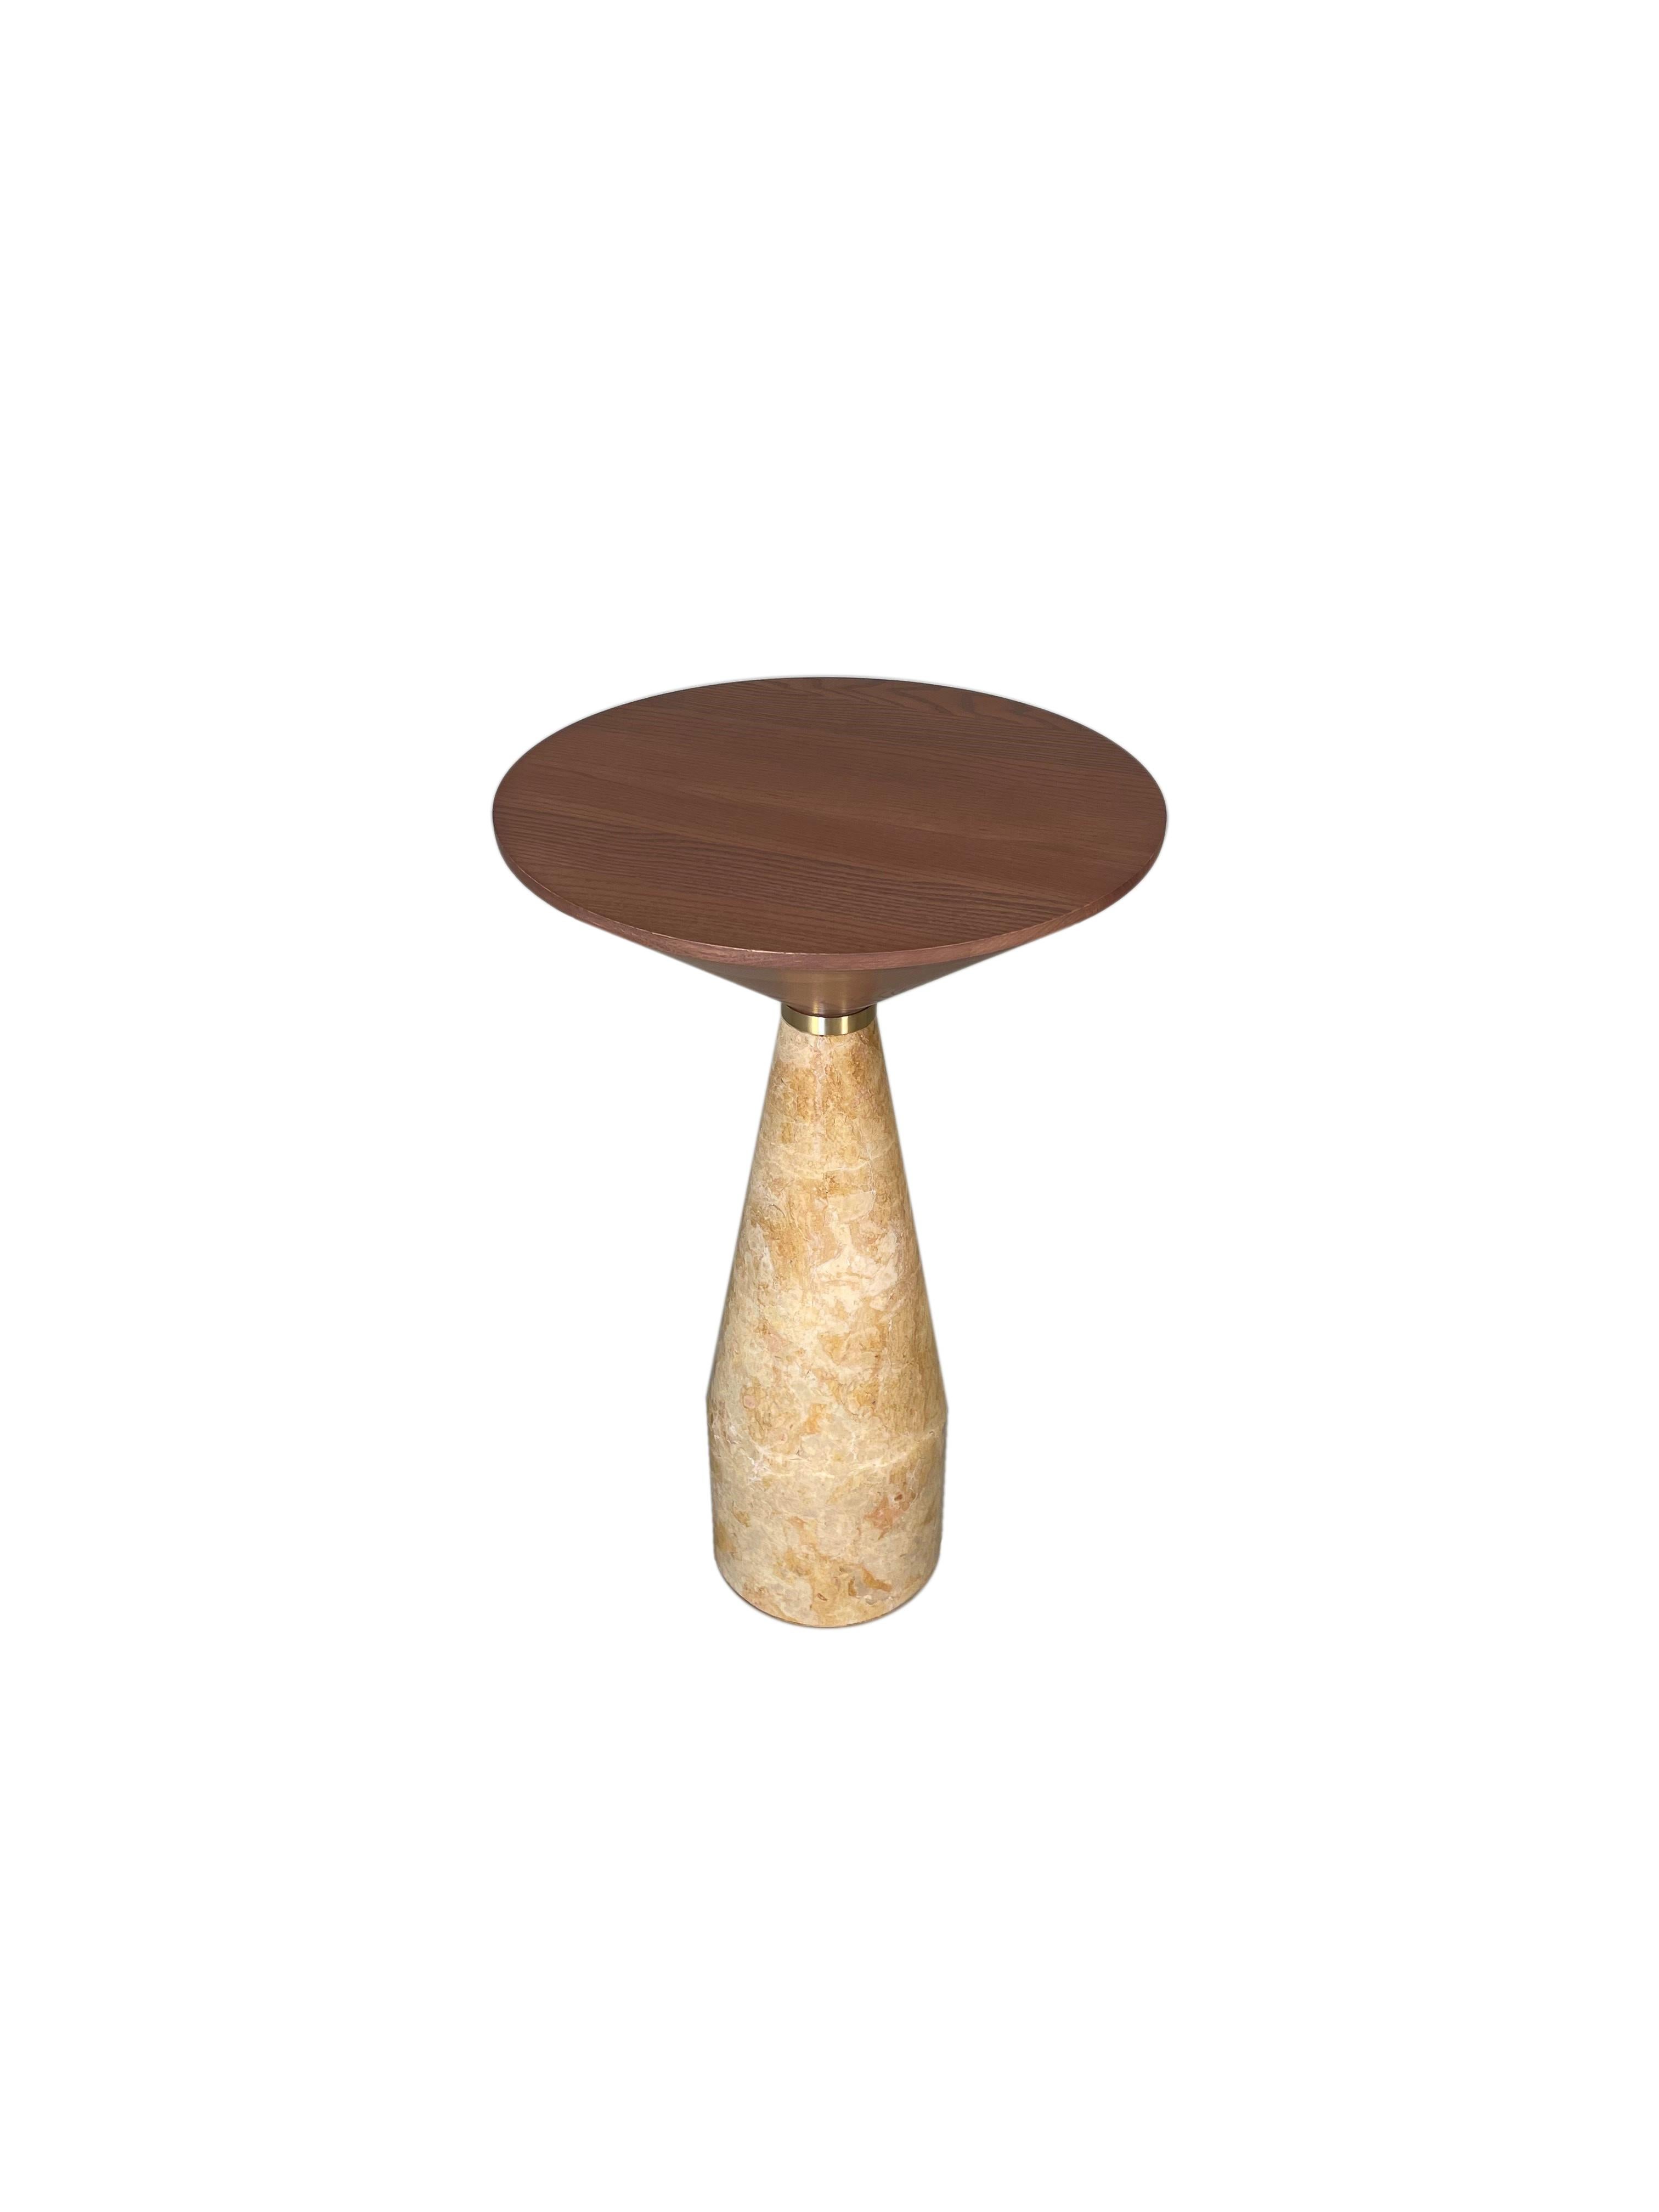 Cino is a new table designed by Italian-Canadian designer Libero Rutilo for Morelato
made of solid turned marble with hand turned top in solid ash wood, available in different wood finishes and different marbles
Dimension D 37 H 61 cm 
Weight